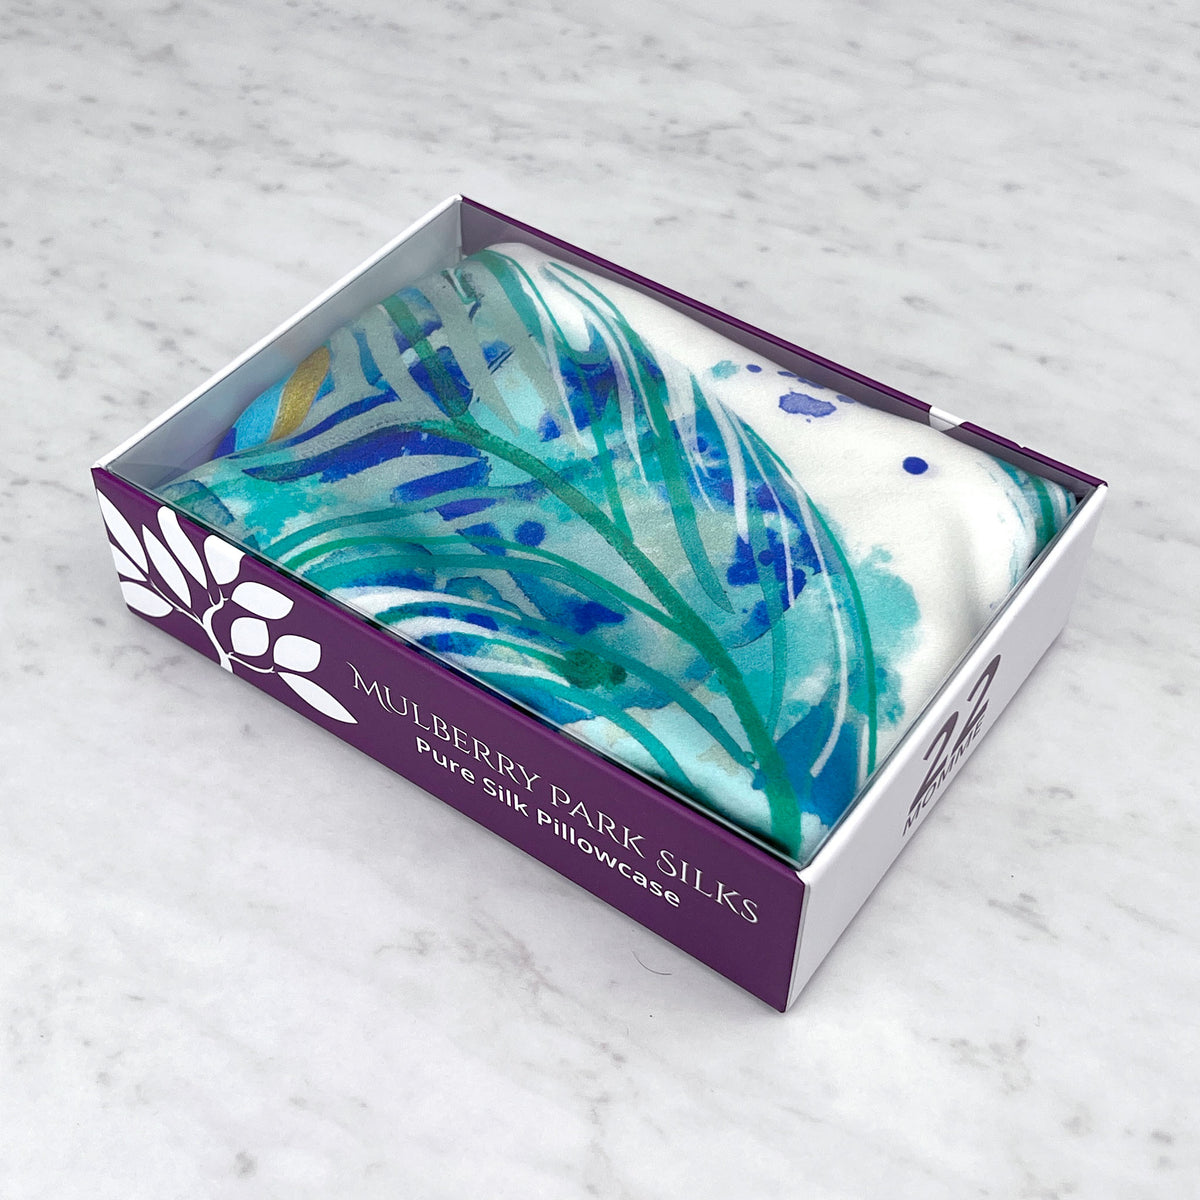 Mulberry Park Silks Peacock Feathers Silk Pillowcase in a box